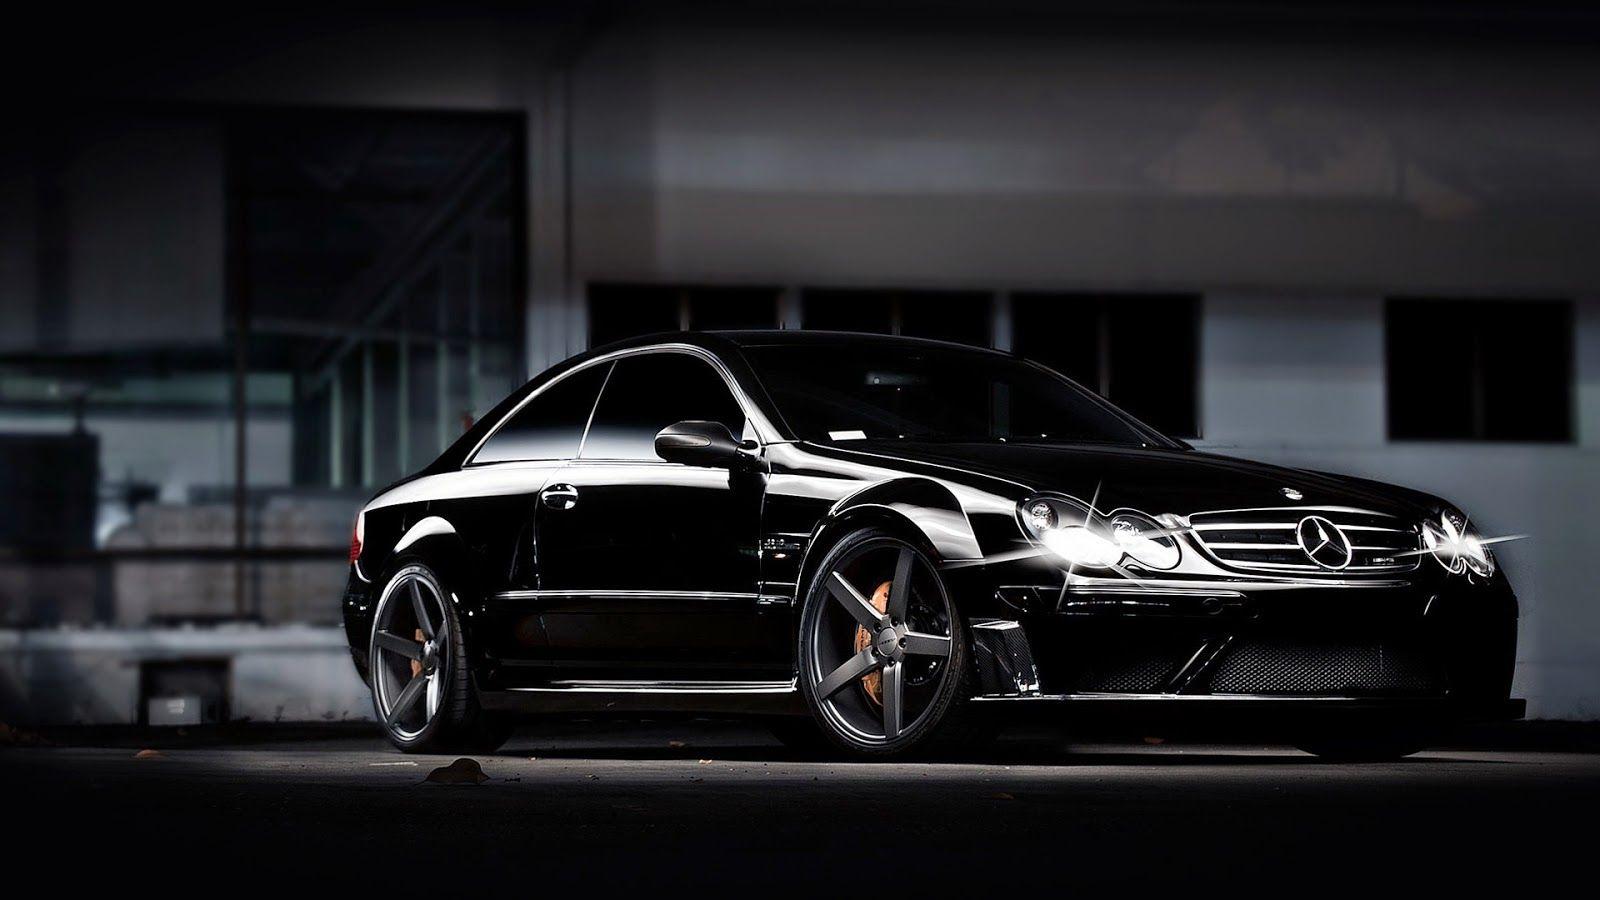 Mercedes Benz C36 Amg Wallpaper HD Photo, Wallpaper and other